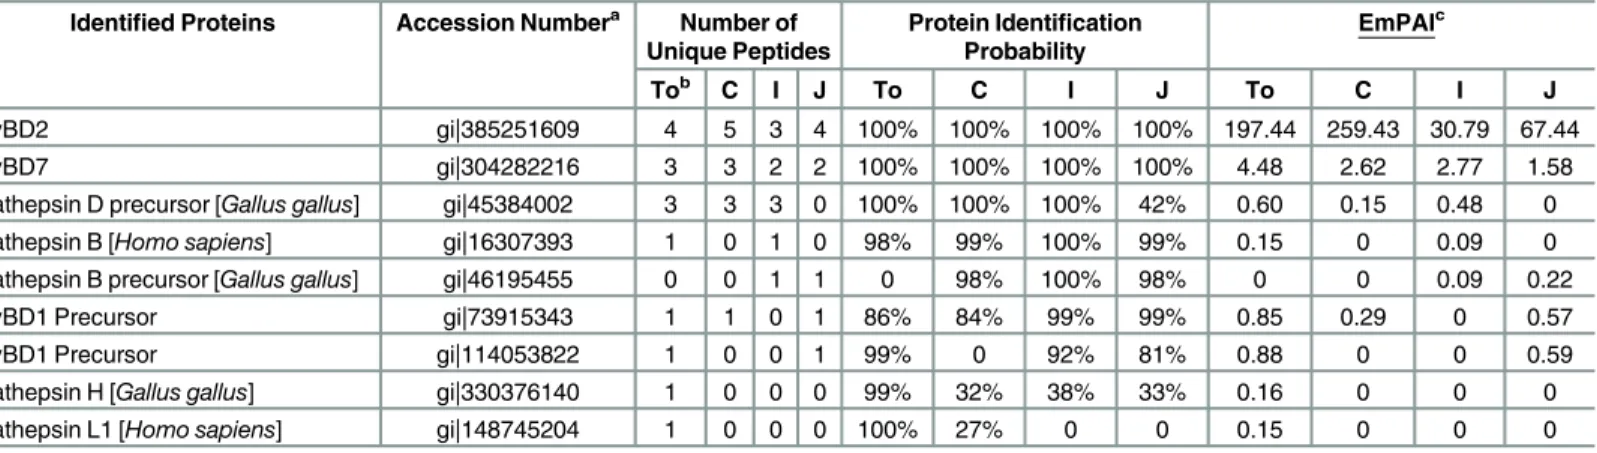 Table 1. Identification of AvBDs and cathepsins in protein extracts from intestinal segments analysed by bottom-up mass spectrometry (nanoLC-MS/MS).